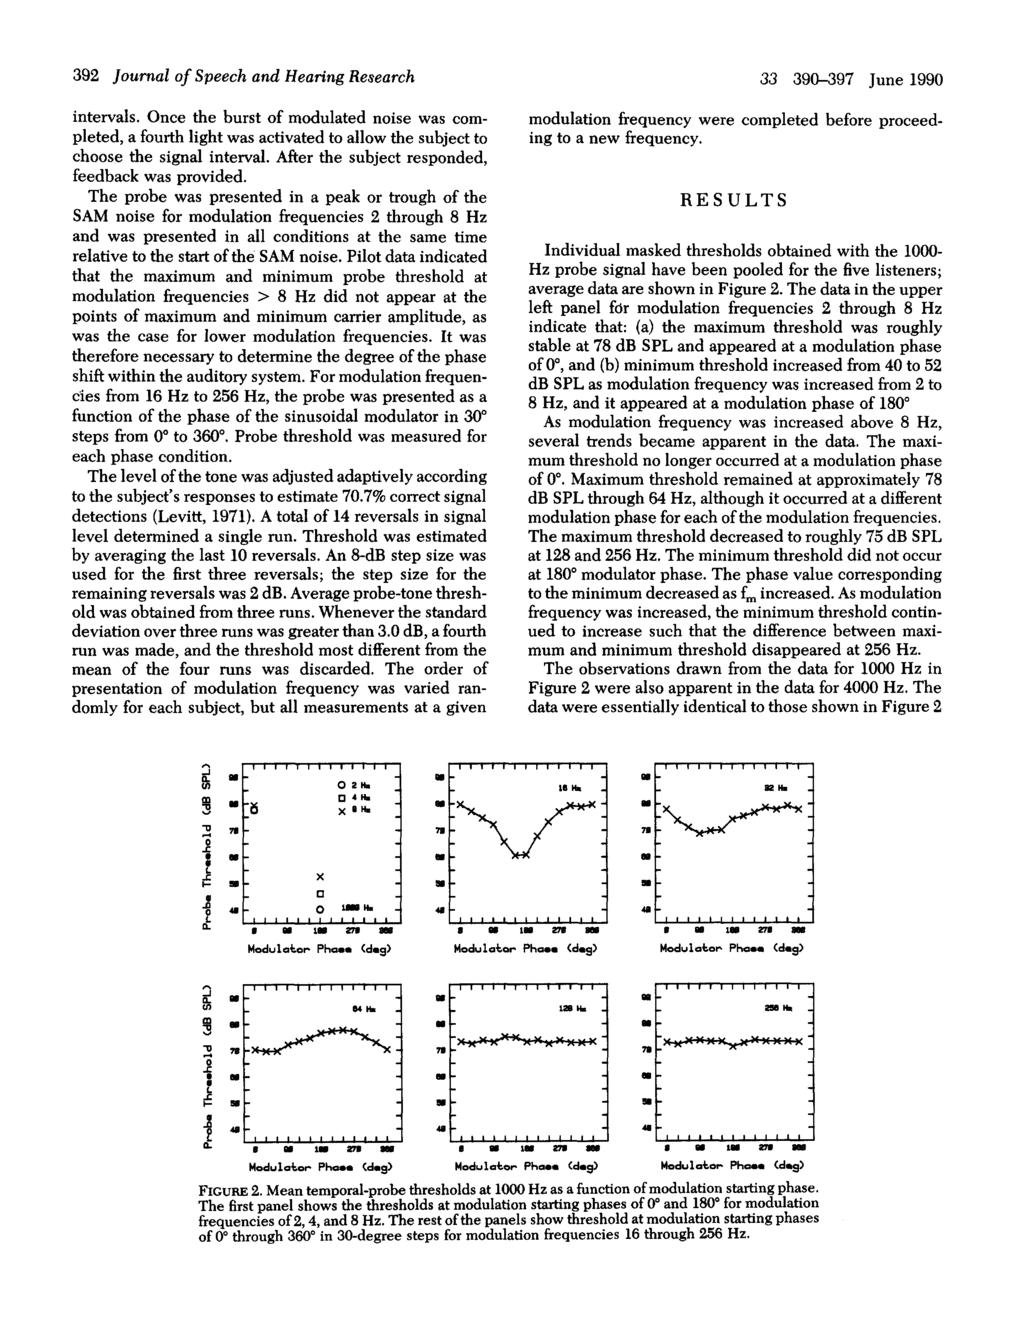 392 Journal of Speech and Hearing Research intervals. Once the burst of modulated noise was completed, a fourth light was activated to allow the subject to choose the signal interval.